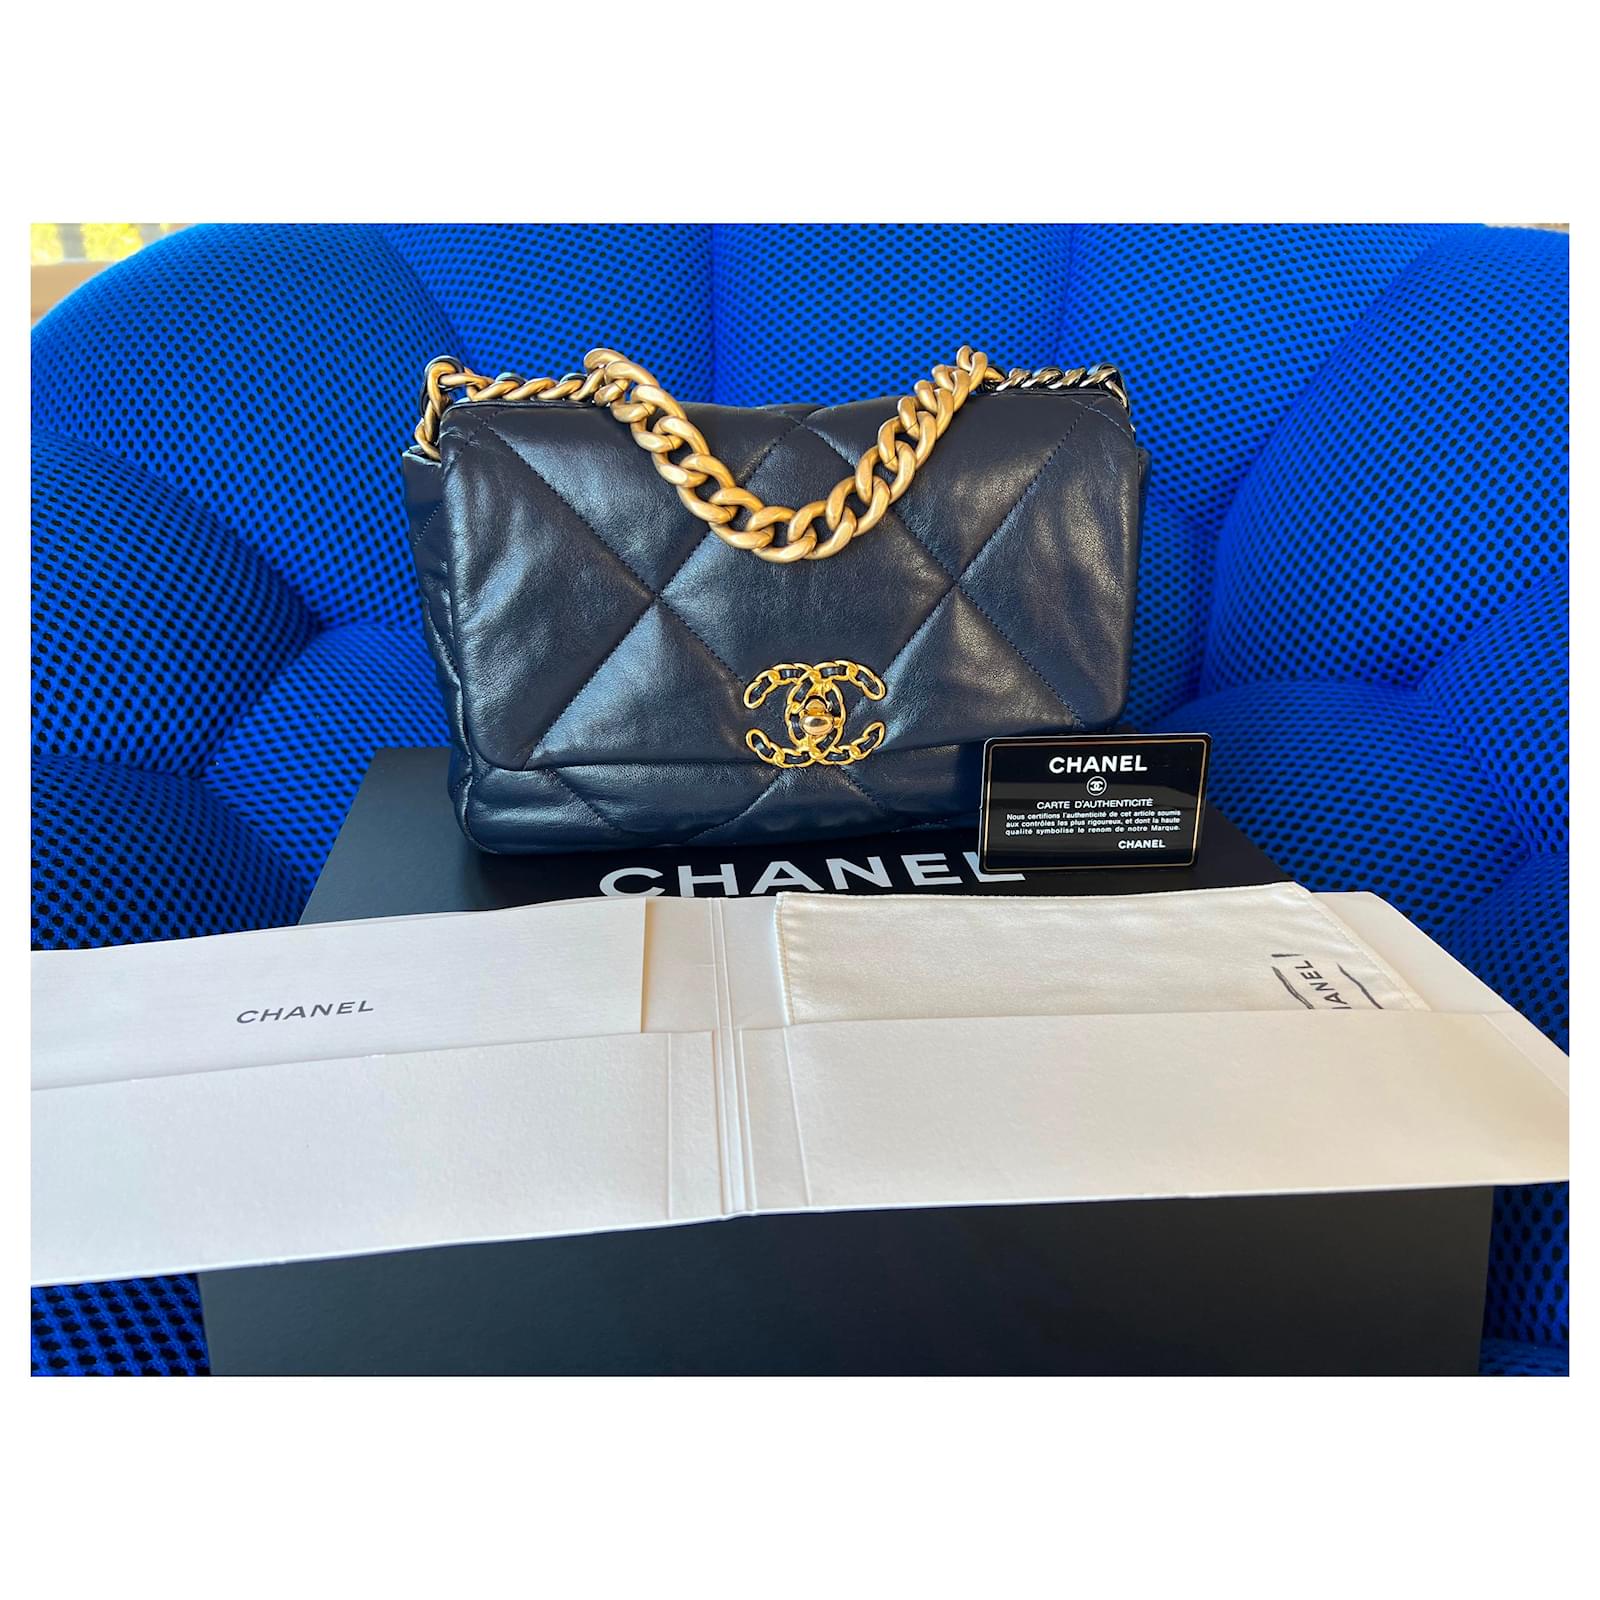 Chanel 19 Bag, Rare and sold out color : Navy Navy blue Lambskin